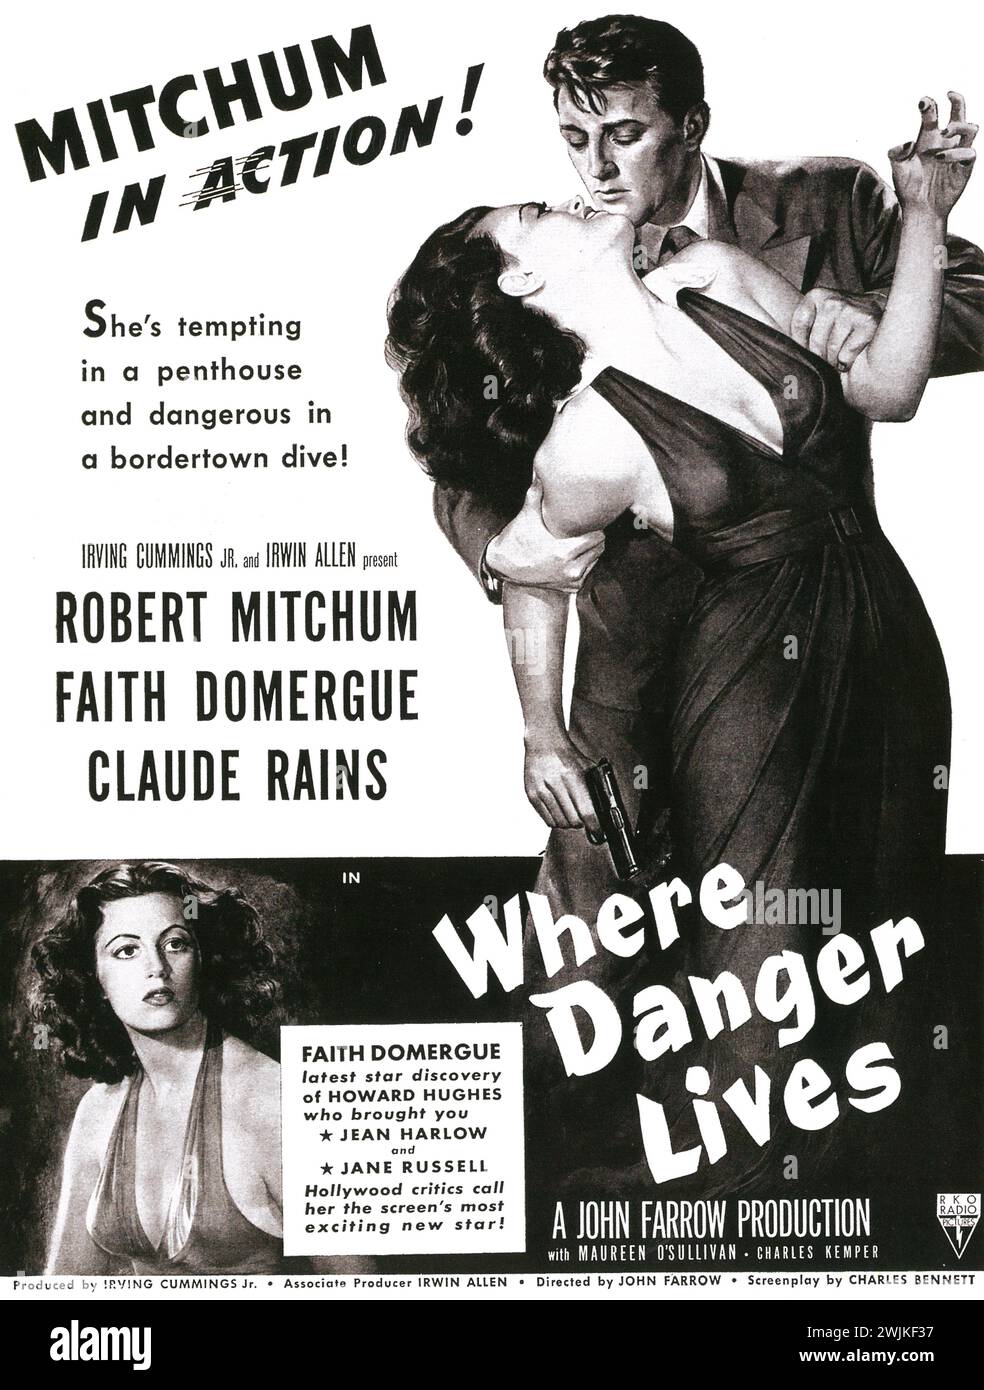 1950 WHERE DANGER LIVES movie poster and print ad. 1950s RKO Radio Pictures film with Faith Domergue and Robert Mitchum, directed by John Farrow Stock Photo